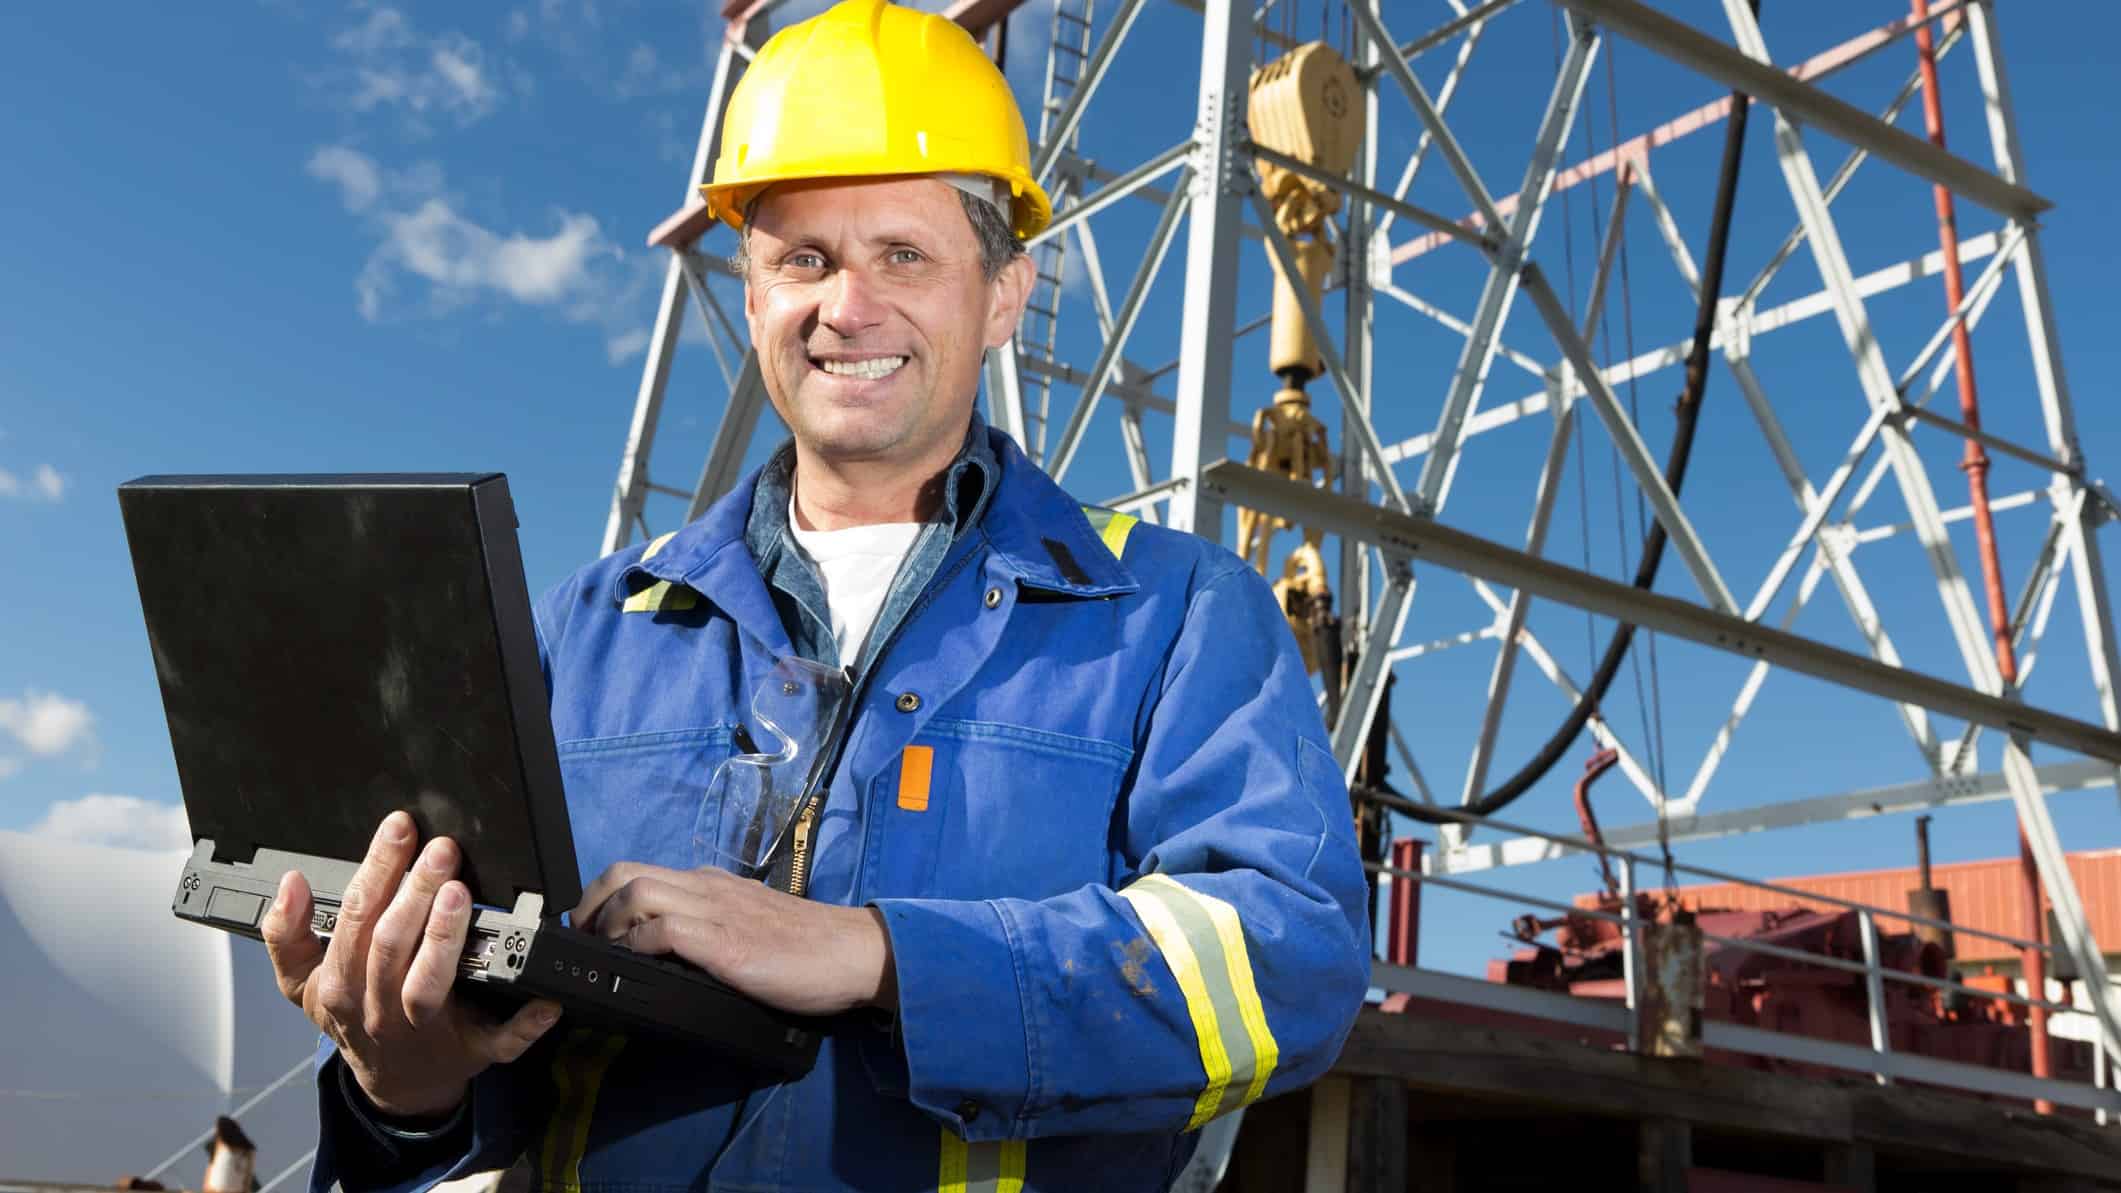 happy miner using a computer at a mine, oil or gas site with rigging in the background.